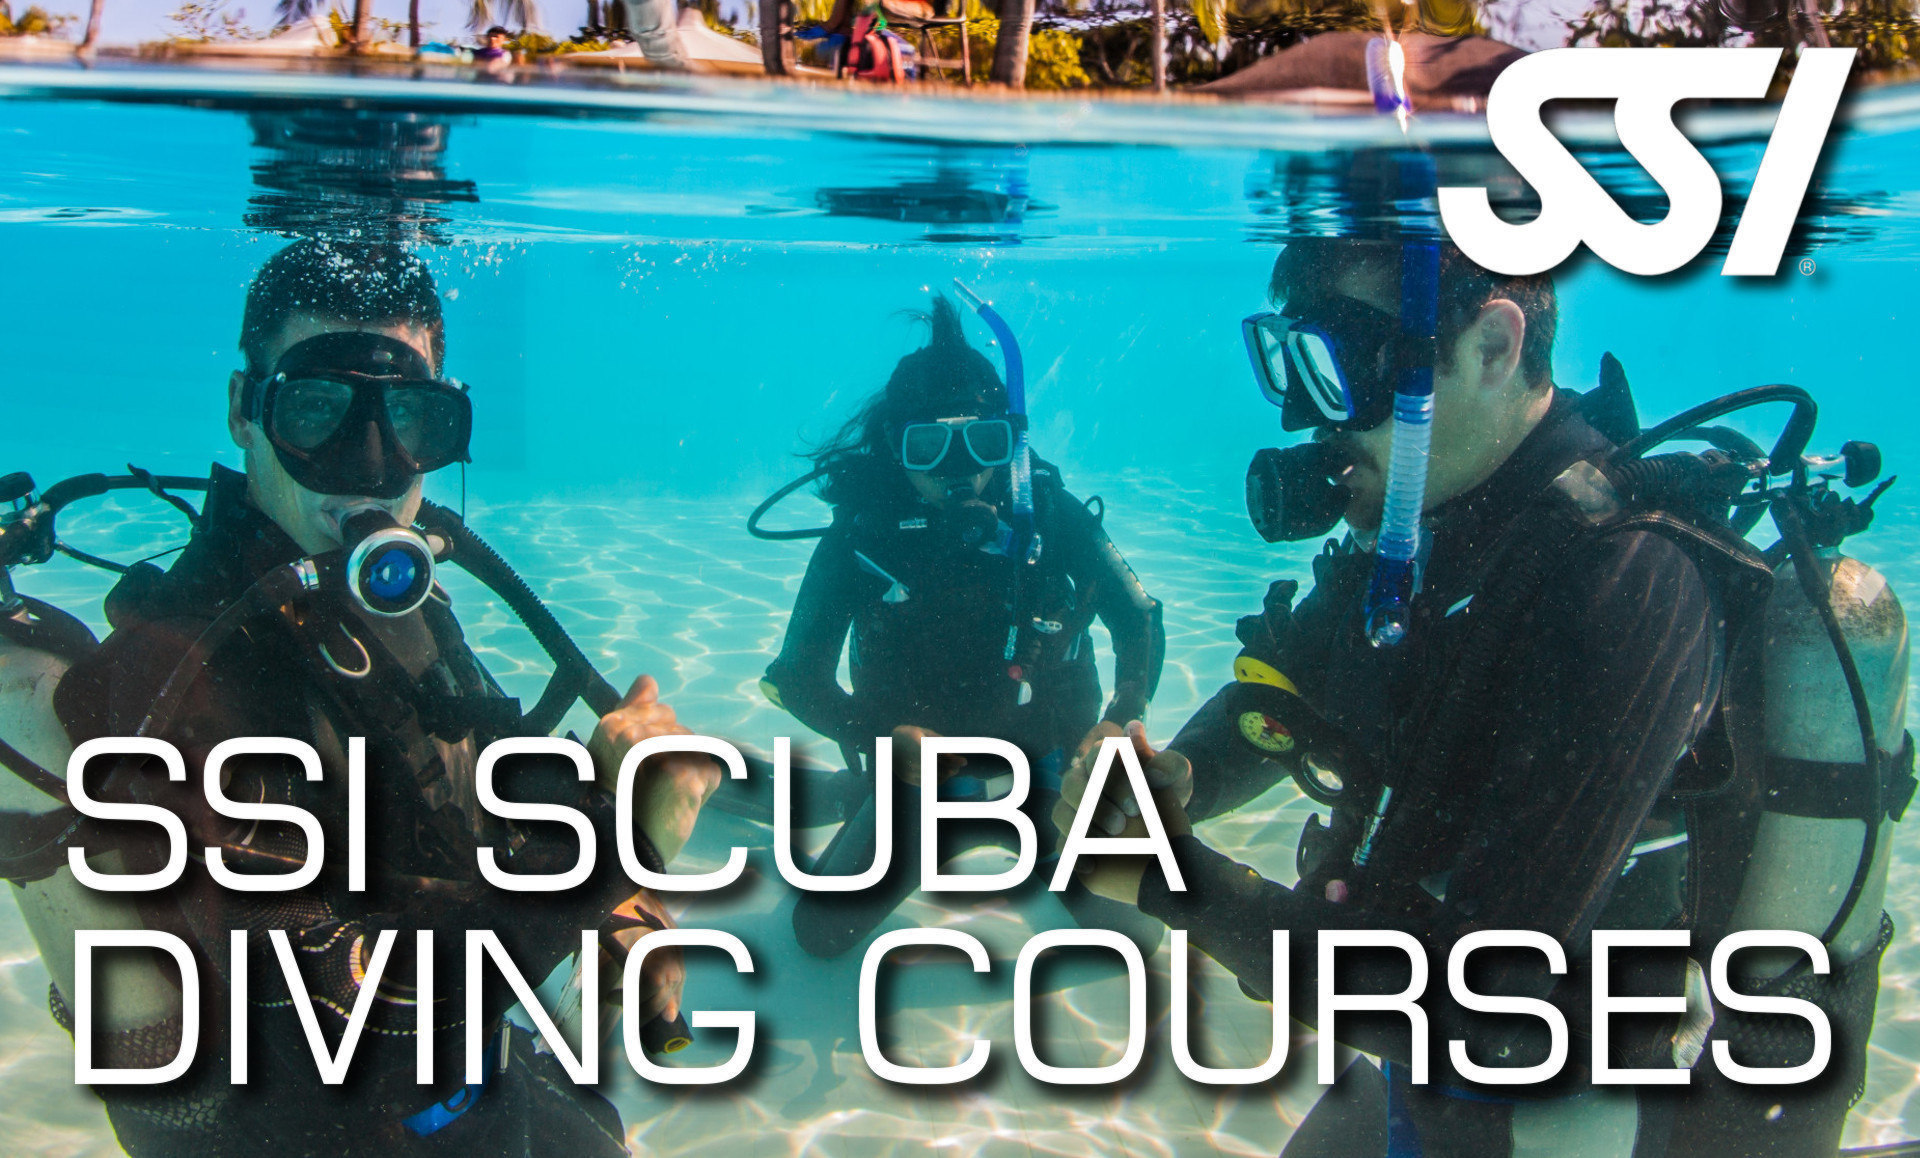 All our SSI scuba diving courses and lessons